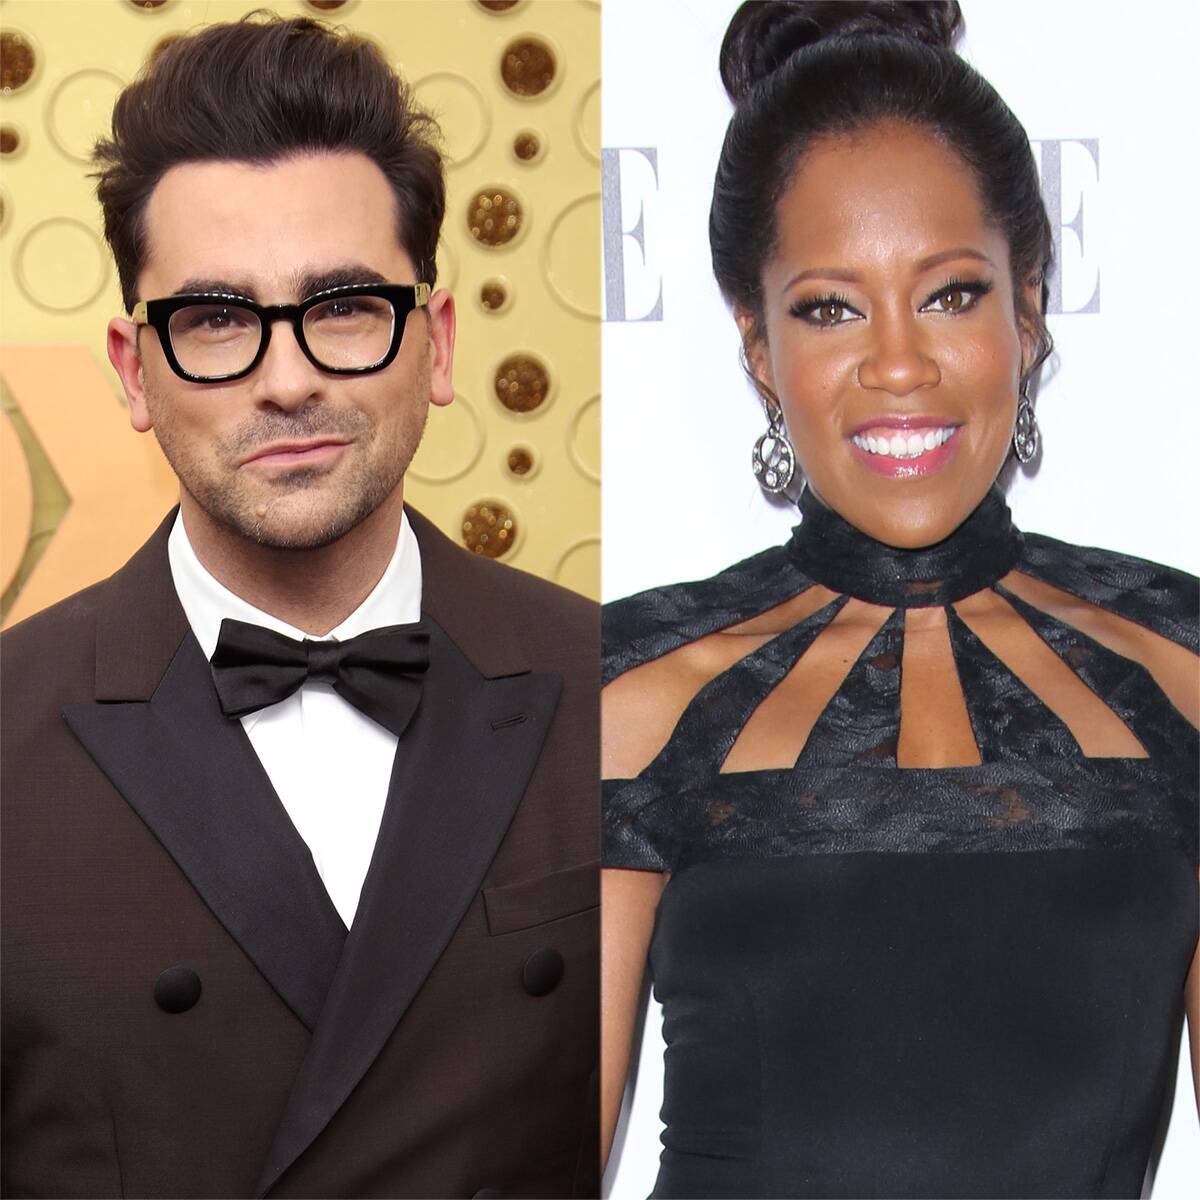 See the Sweet Note Dan Levy Left Regina King After Hosting Saturday Night Live